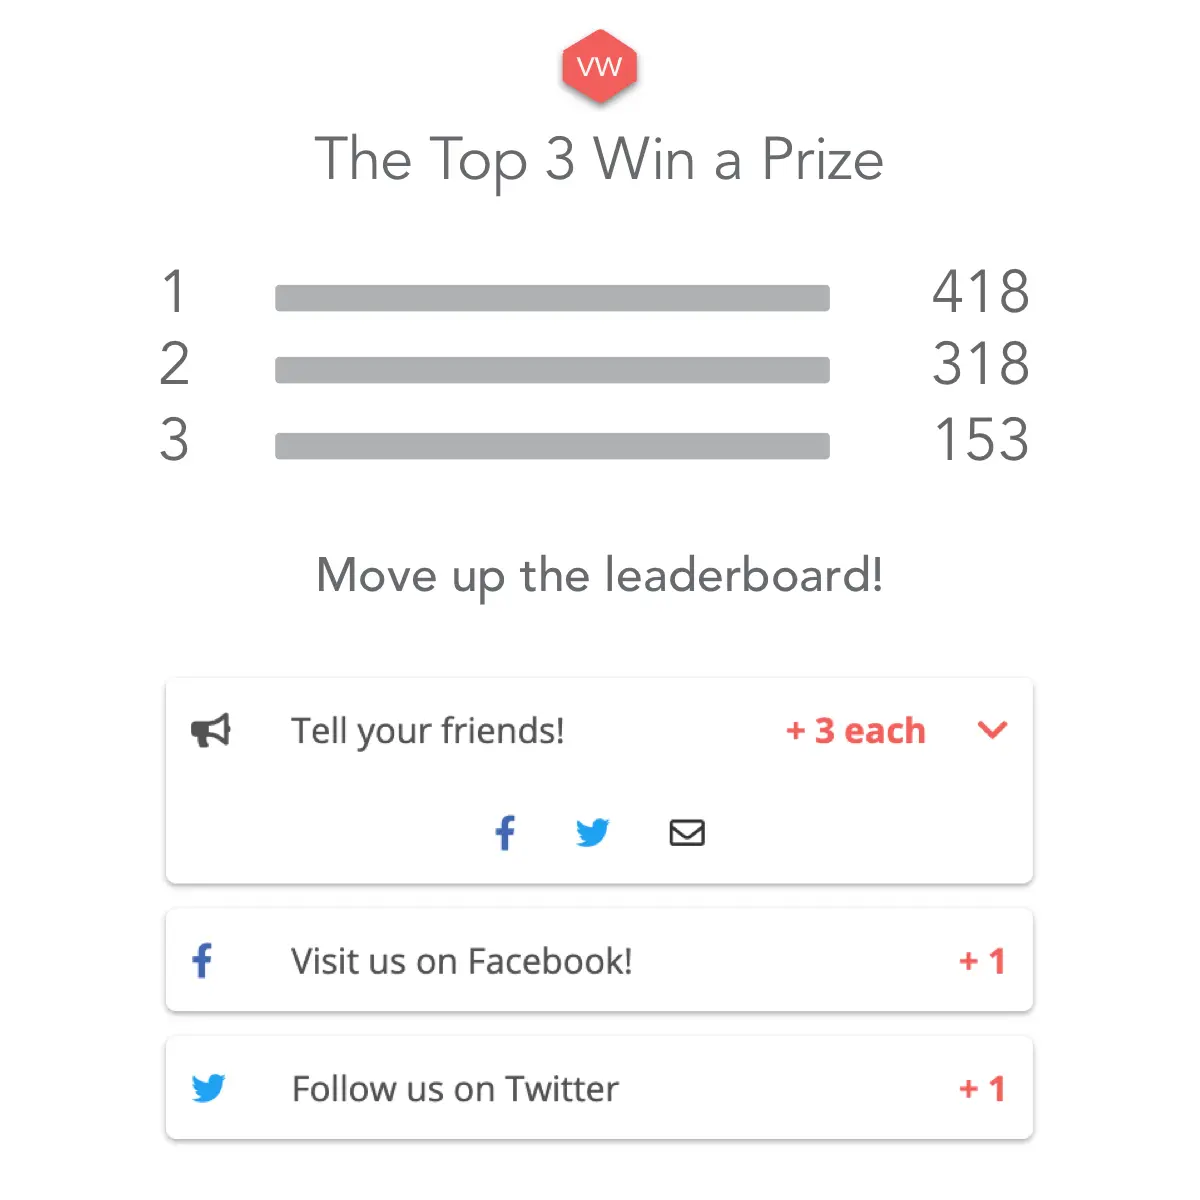 Top three win a prize and move up